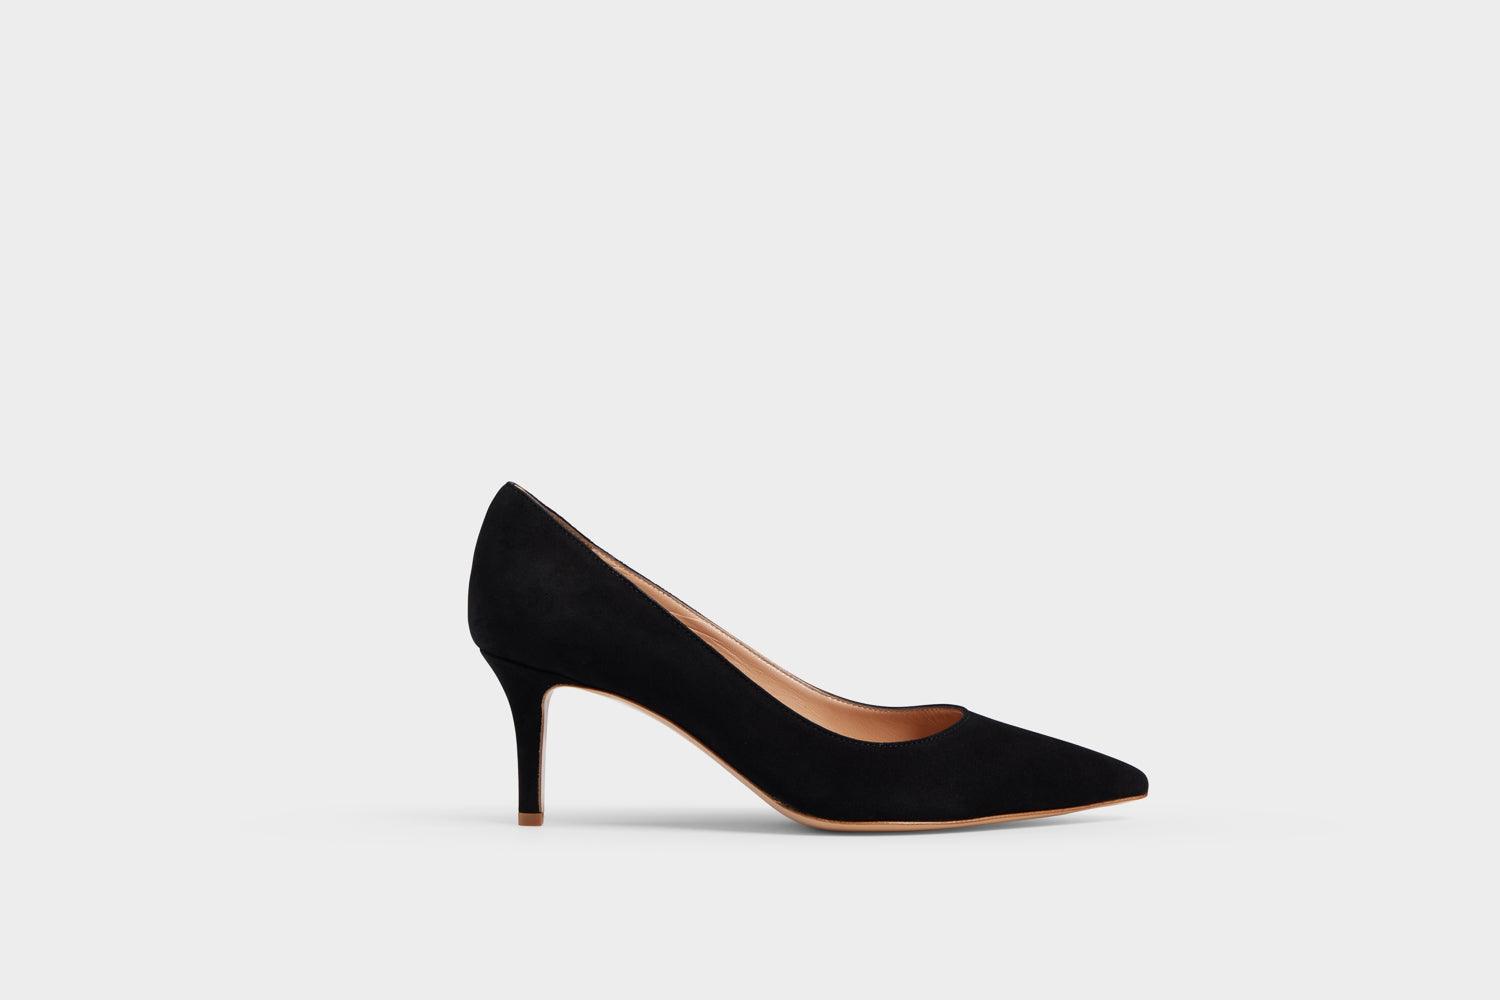 MADE THE EDIT Milly Black Suede Heel